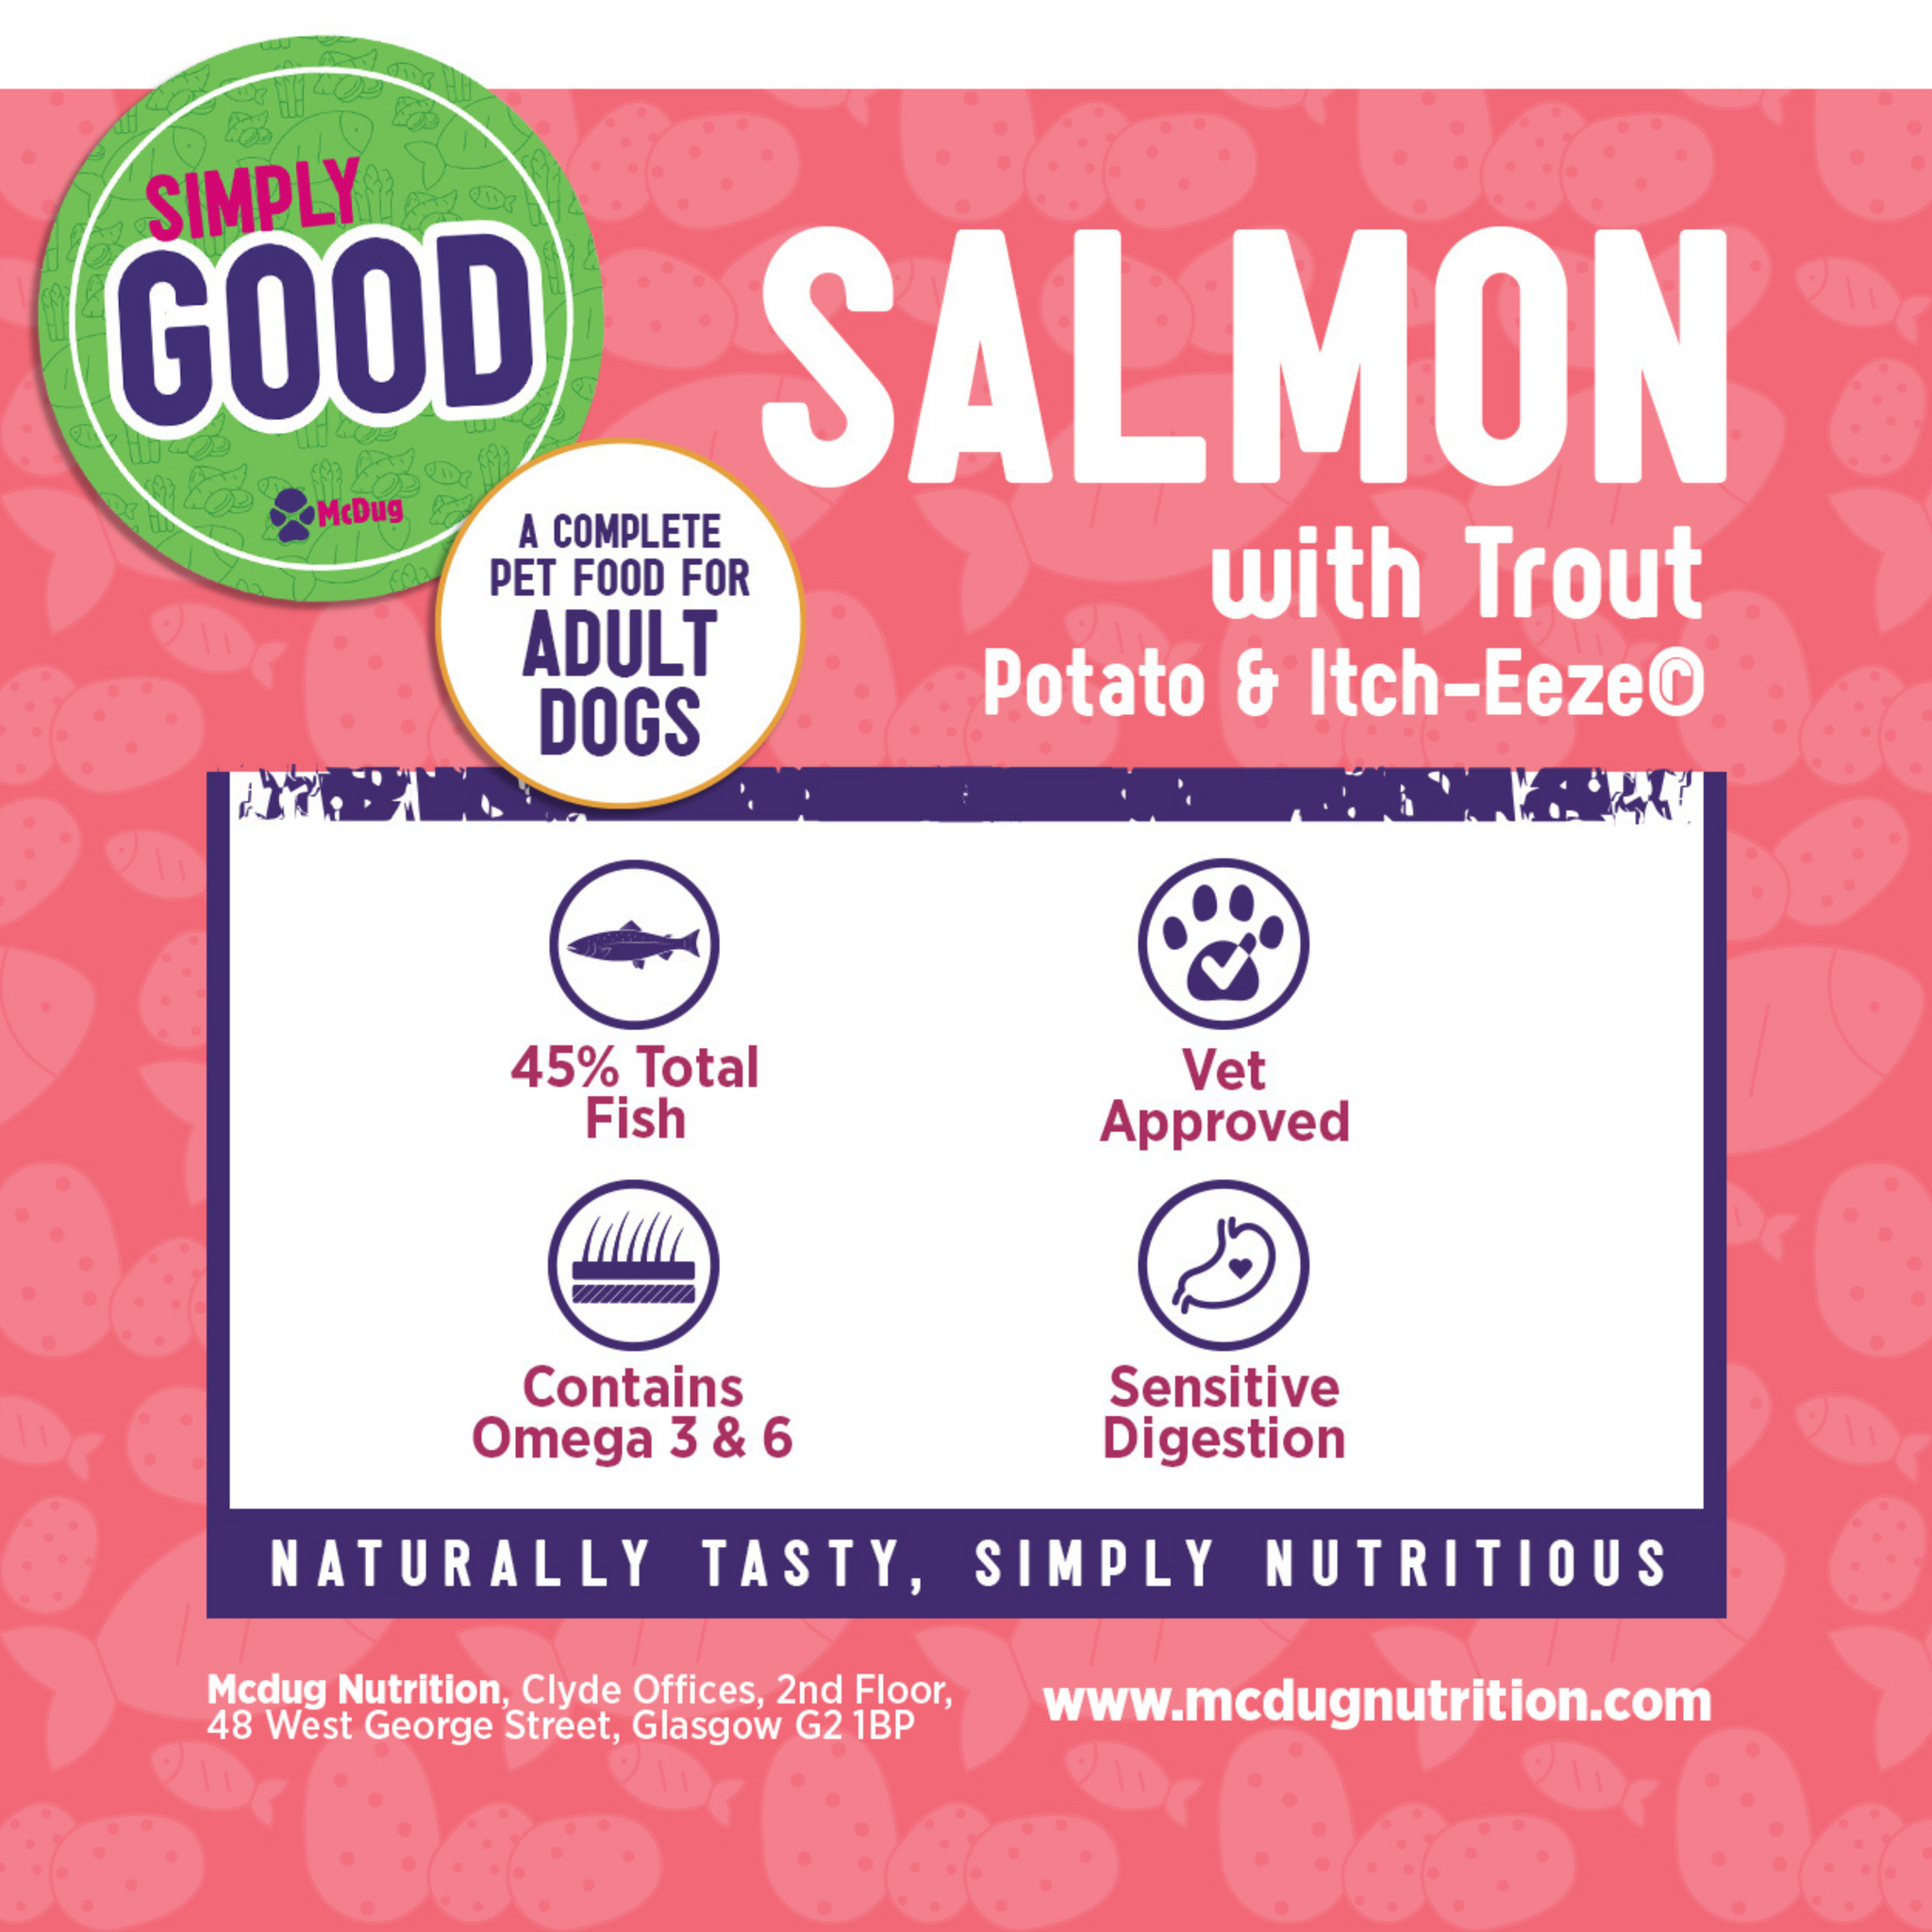 Simply Good Salmon with Trout, Potato & Itch-Eeze® (Adult Dog)